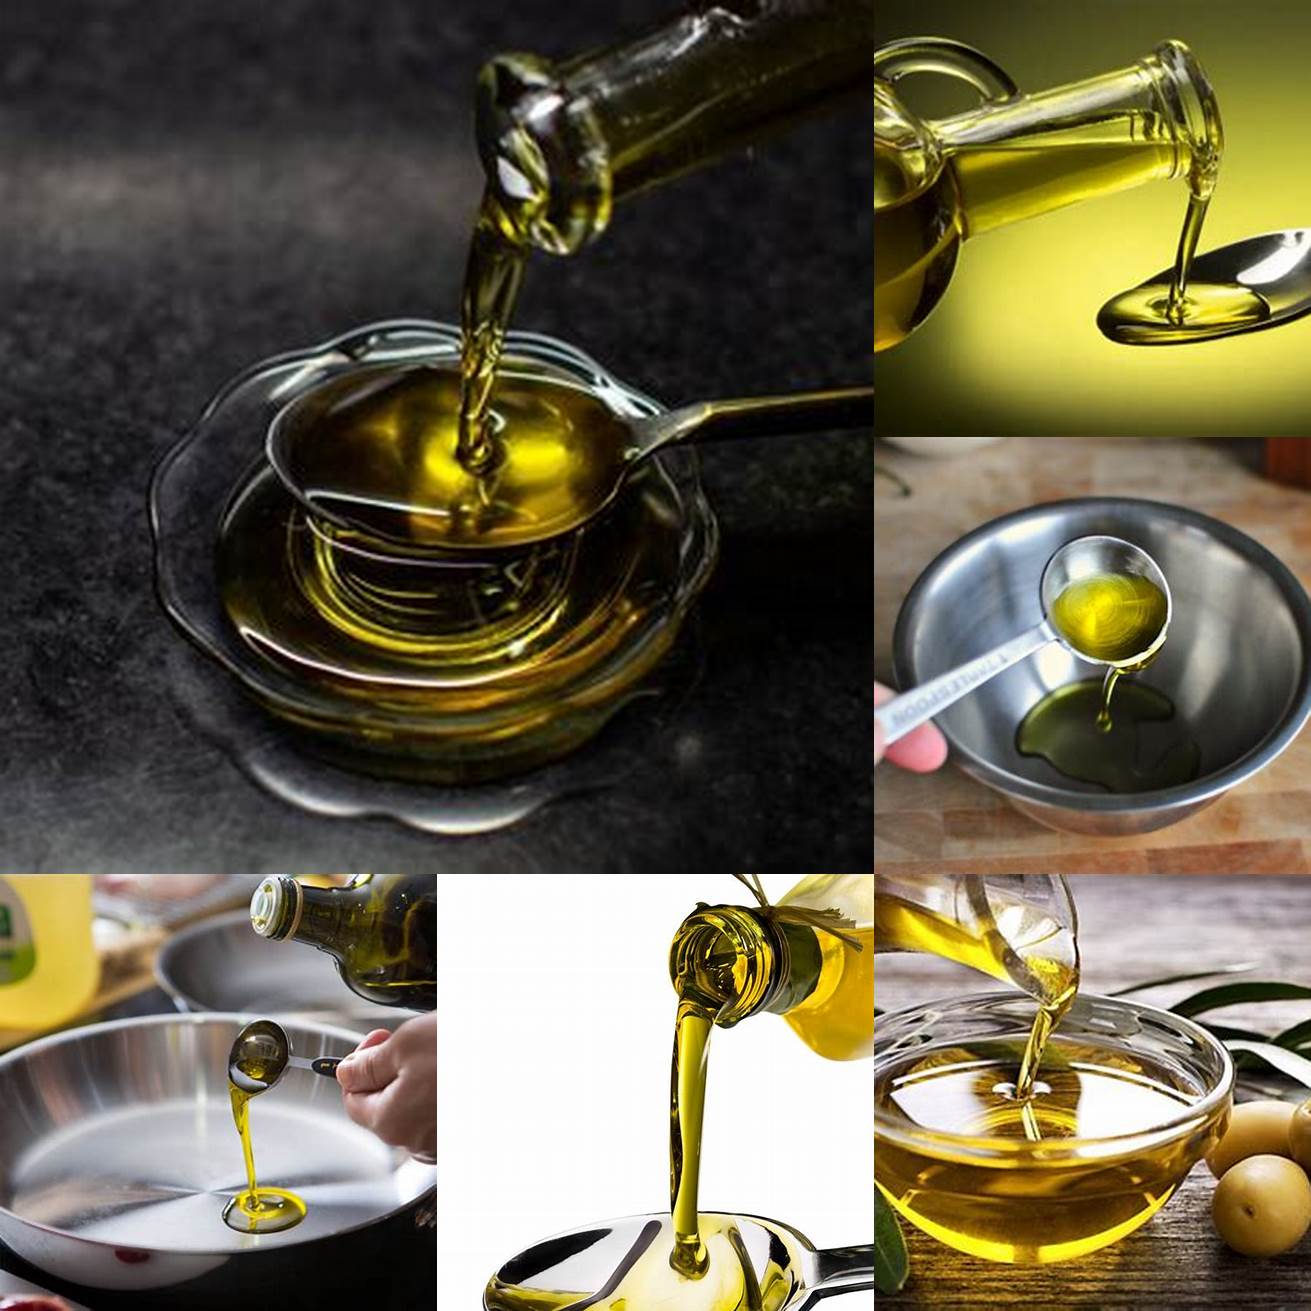 1 tablespoon of olive oil